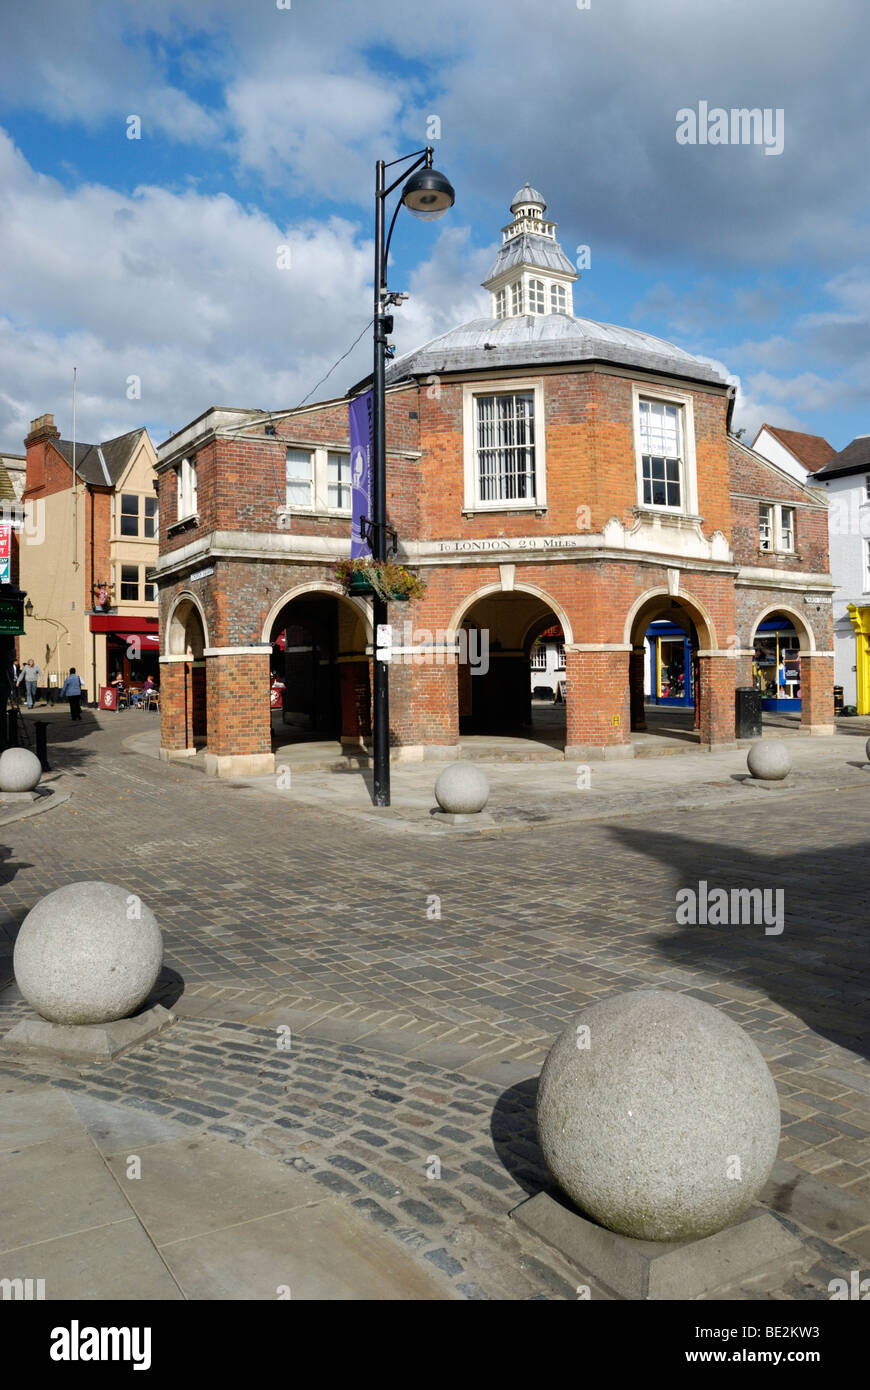 Church Square and the Little Market House in High Wycombe, Buckinghamshire, England, UK. Stock Photo